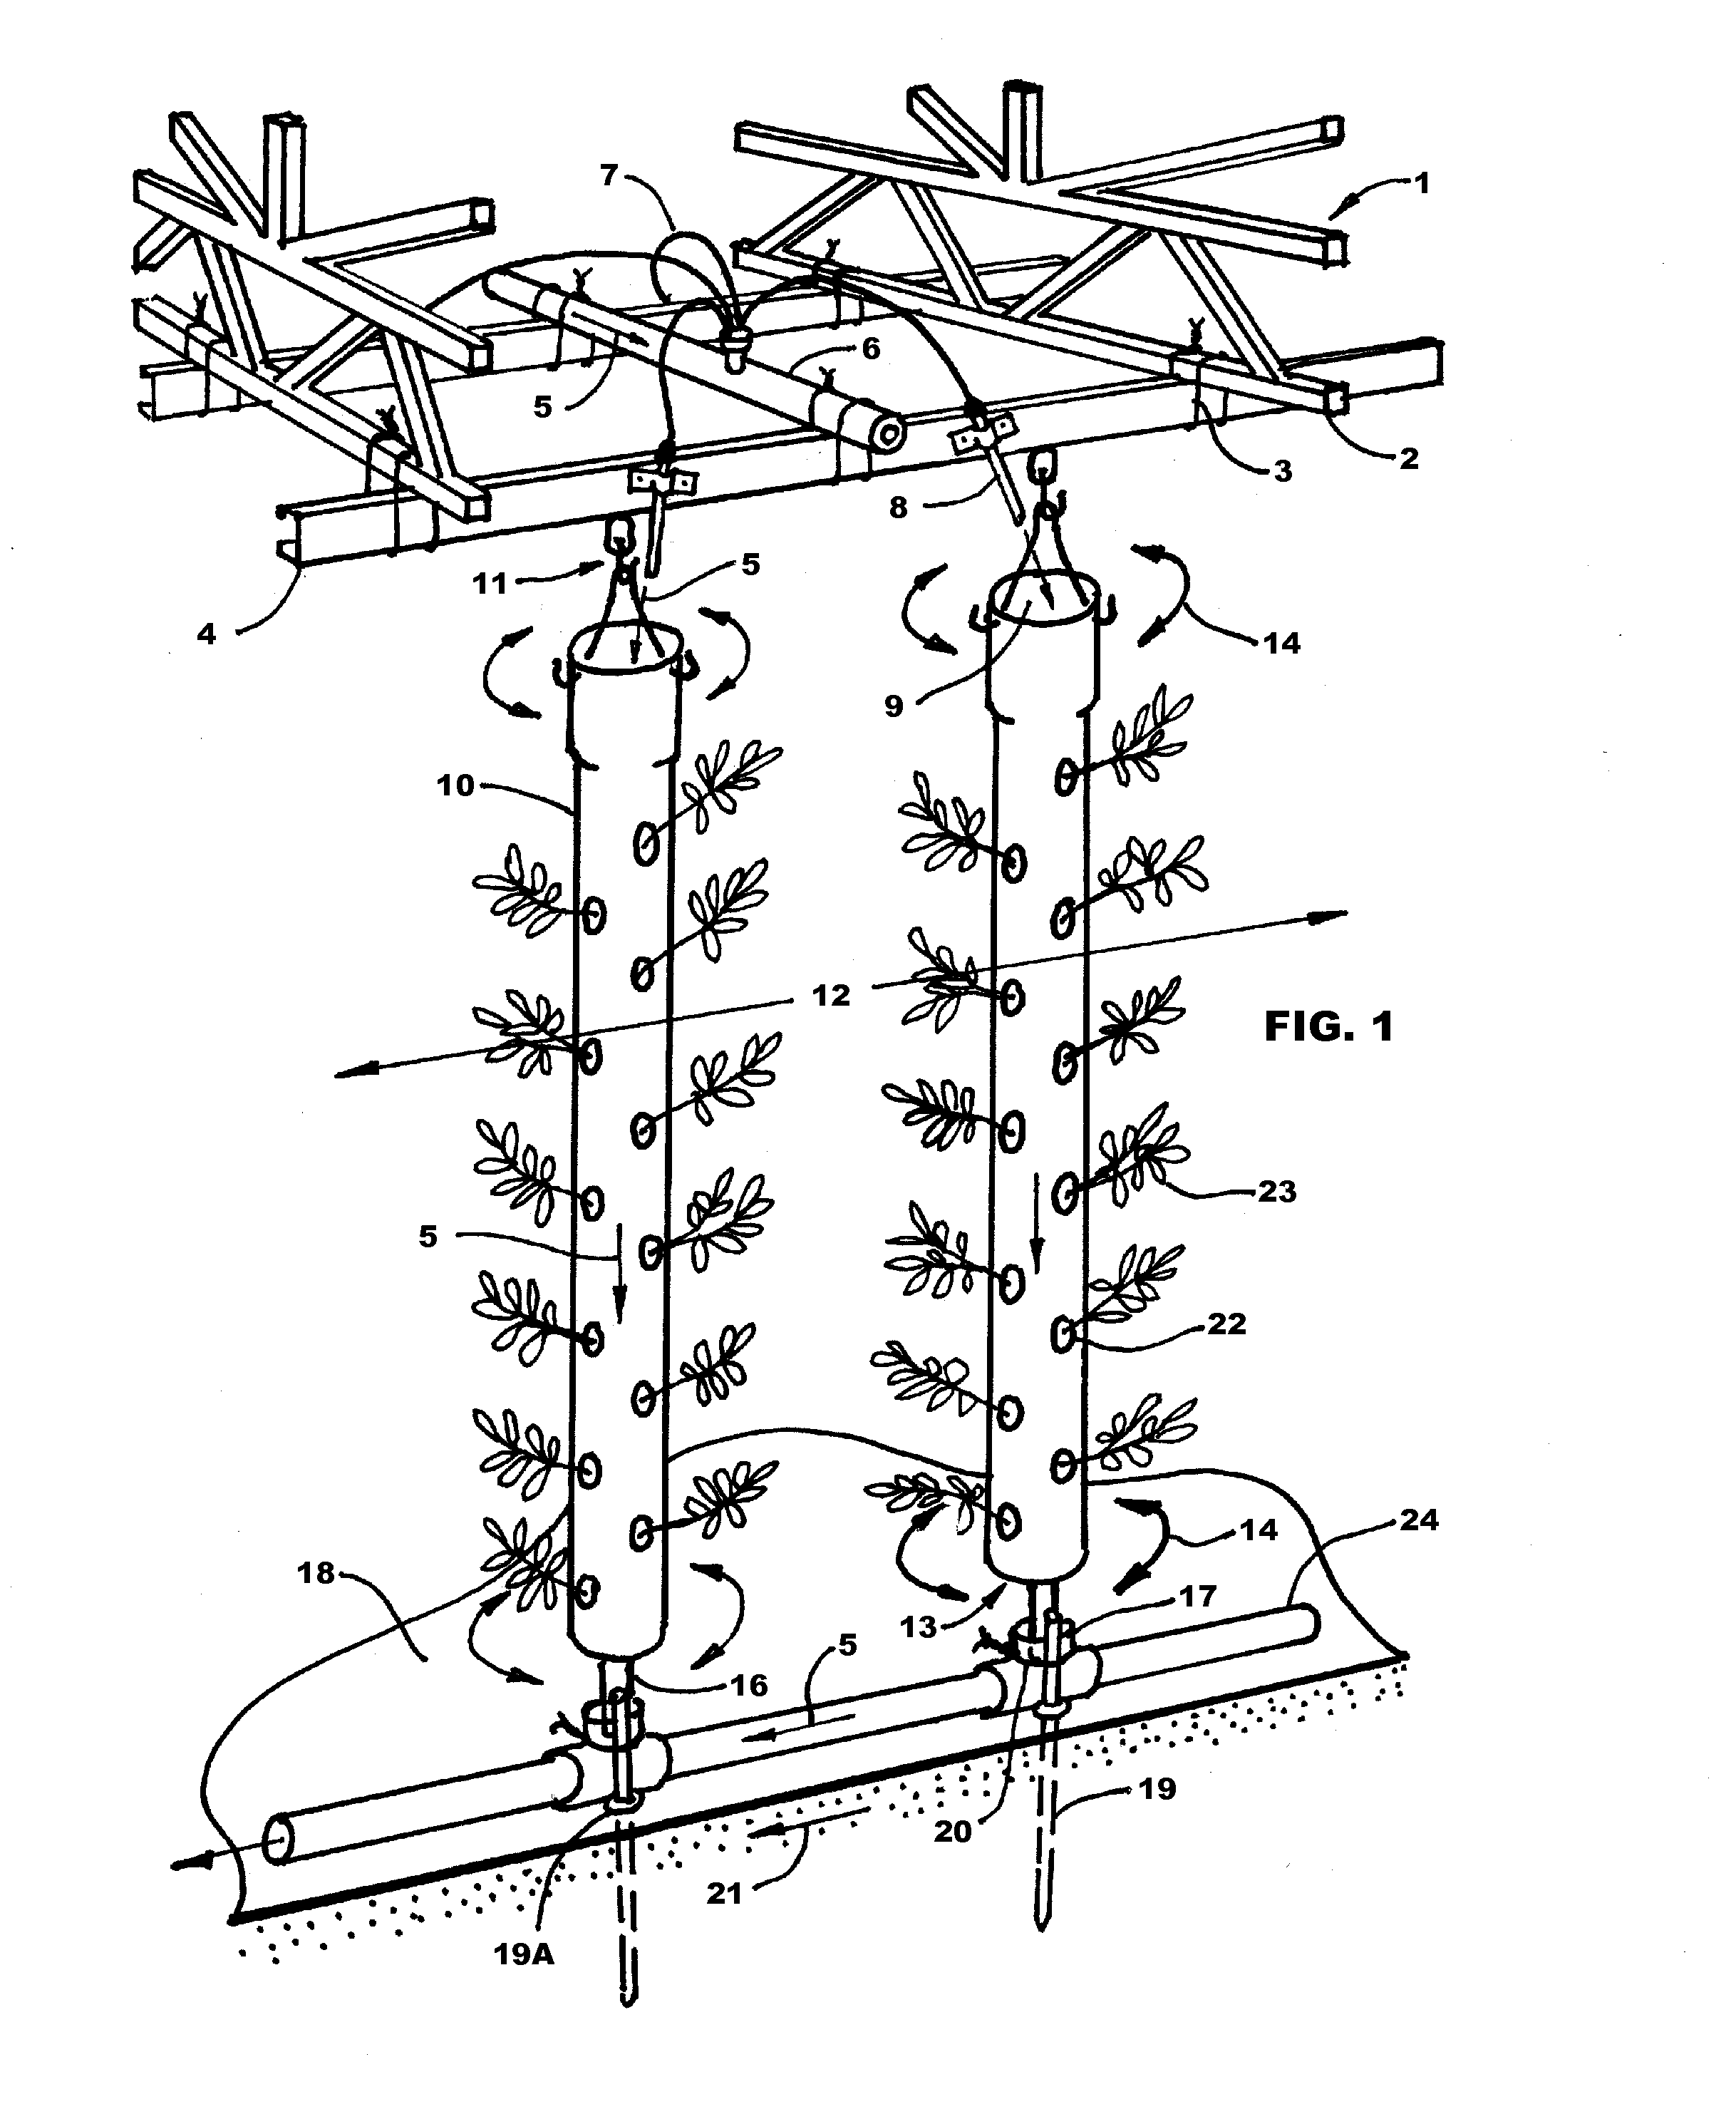 Light-weight modular adjustable vertical hydroponic growing system and method